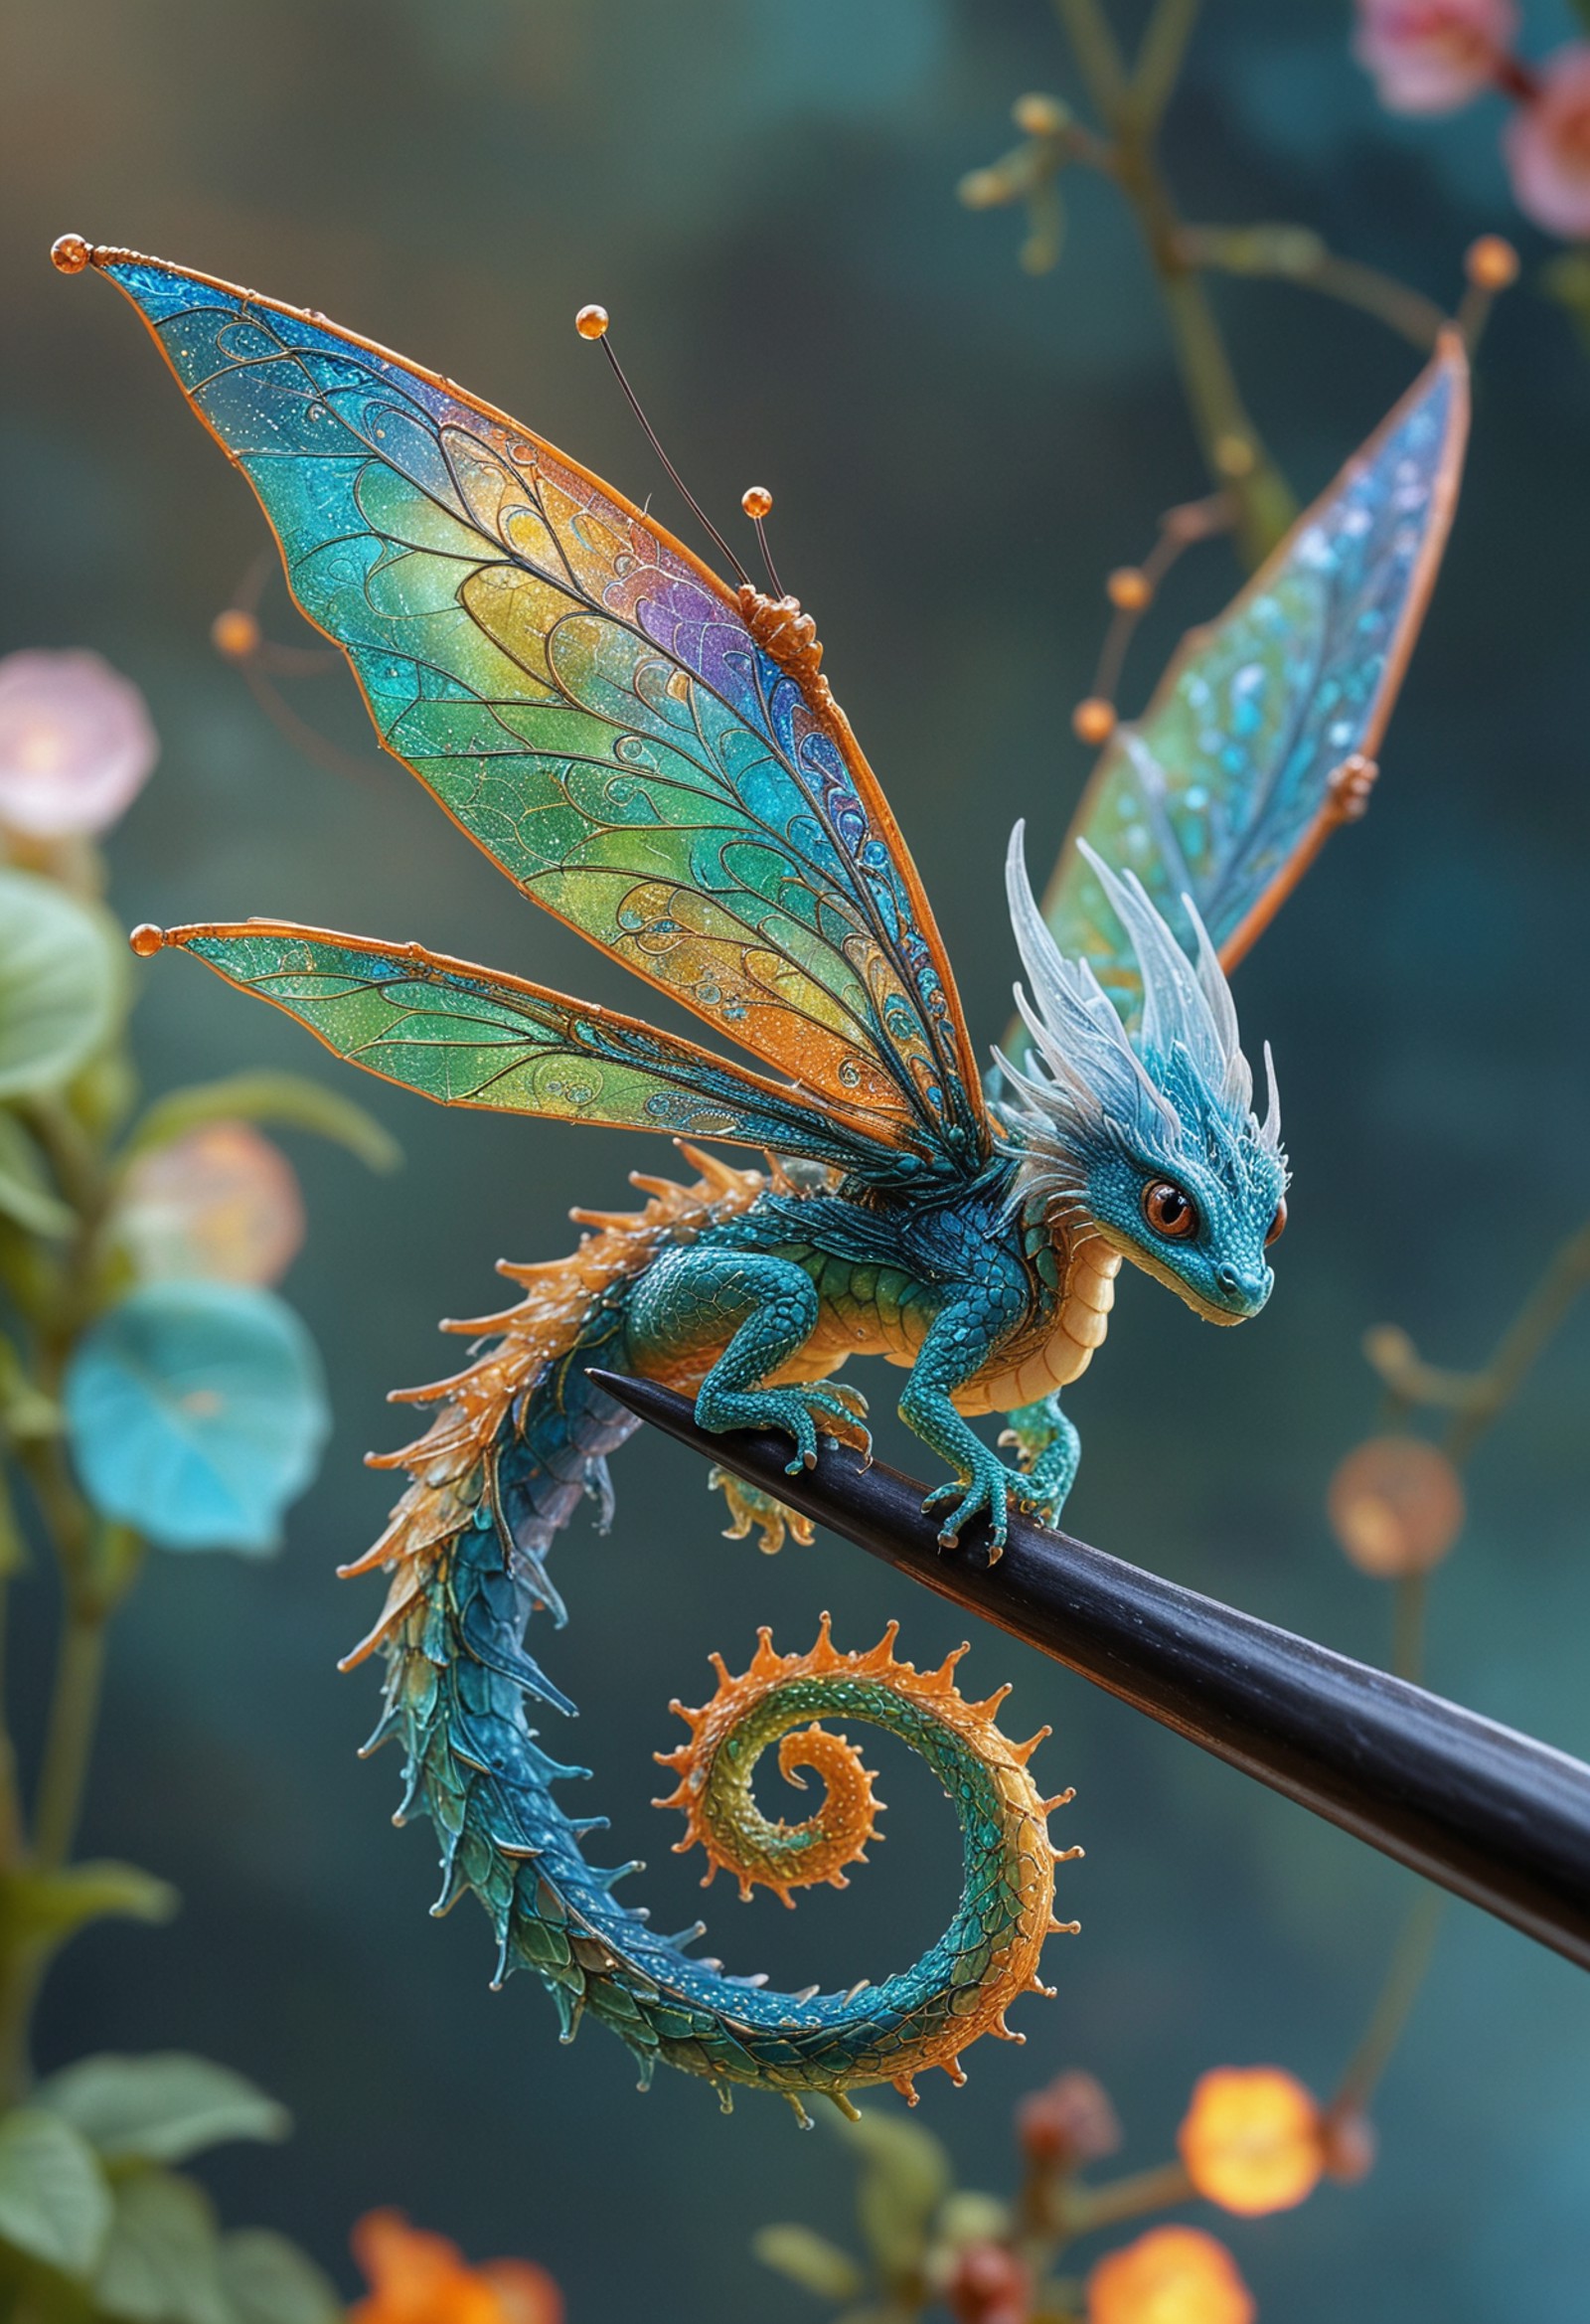 A fantastical creature that appears to be a blend between a dragon and a dragonfly, perched on a slender branch. The creature is adorned with intricate scales and an elaborate, curling tail reminiscent of a seahorse. Its wings, bear the delicate veining and iridescent colors typical of dragonfly wings, are outstretched and glisten with dew-like droplets. The creature is set against a soft-focus background.